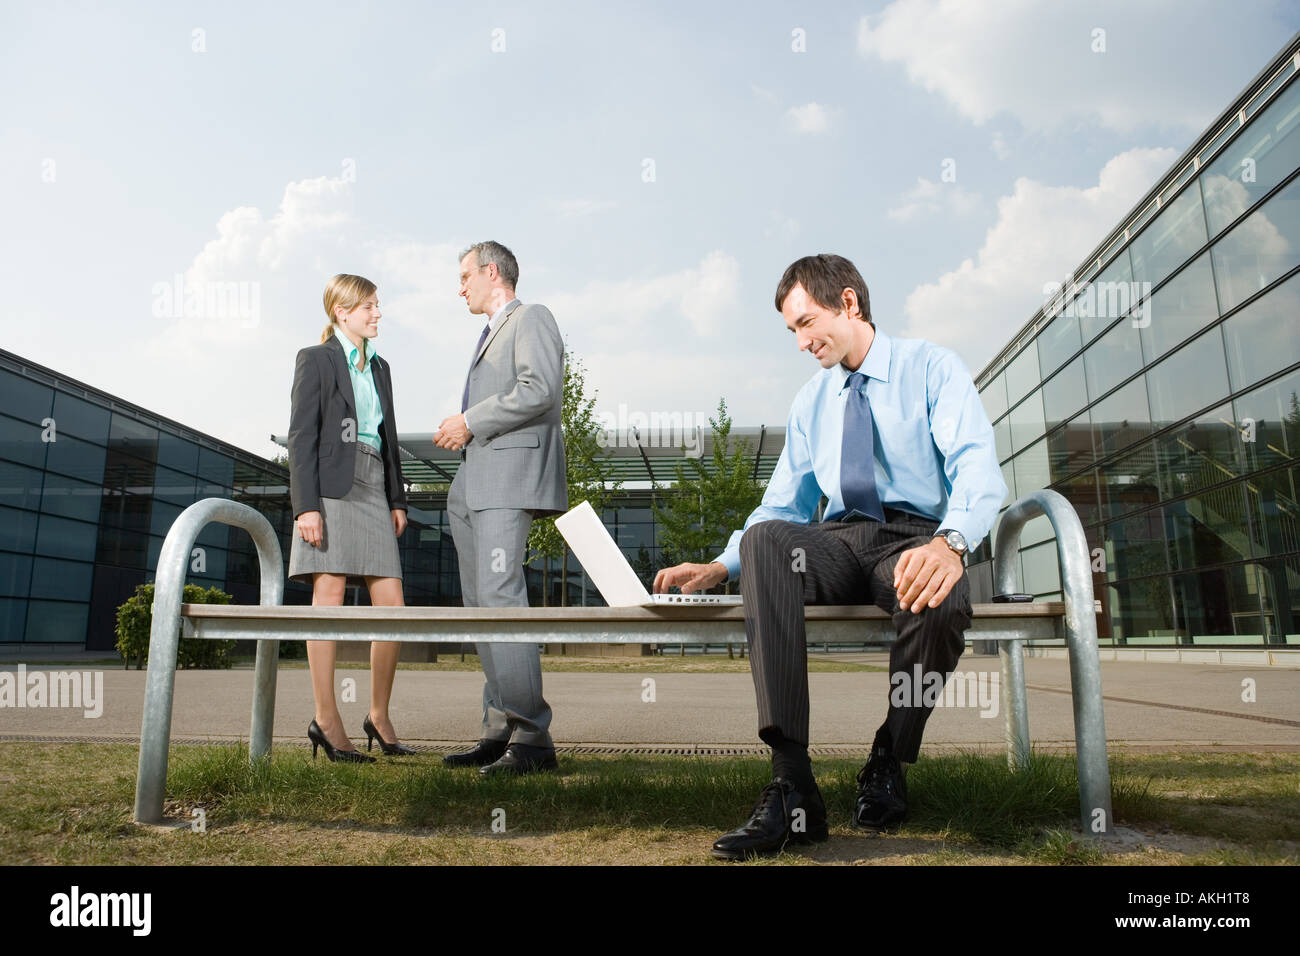 Businesspeople on office court bench Stock Photo